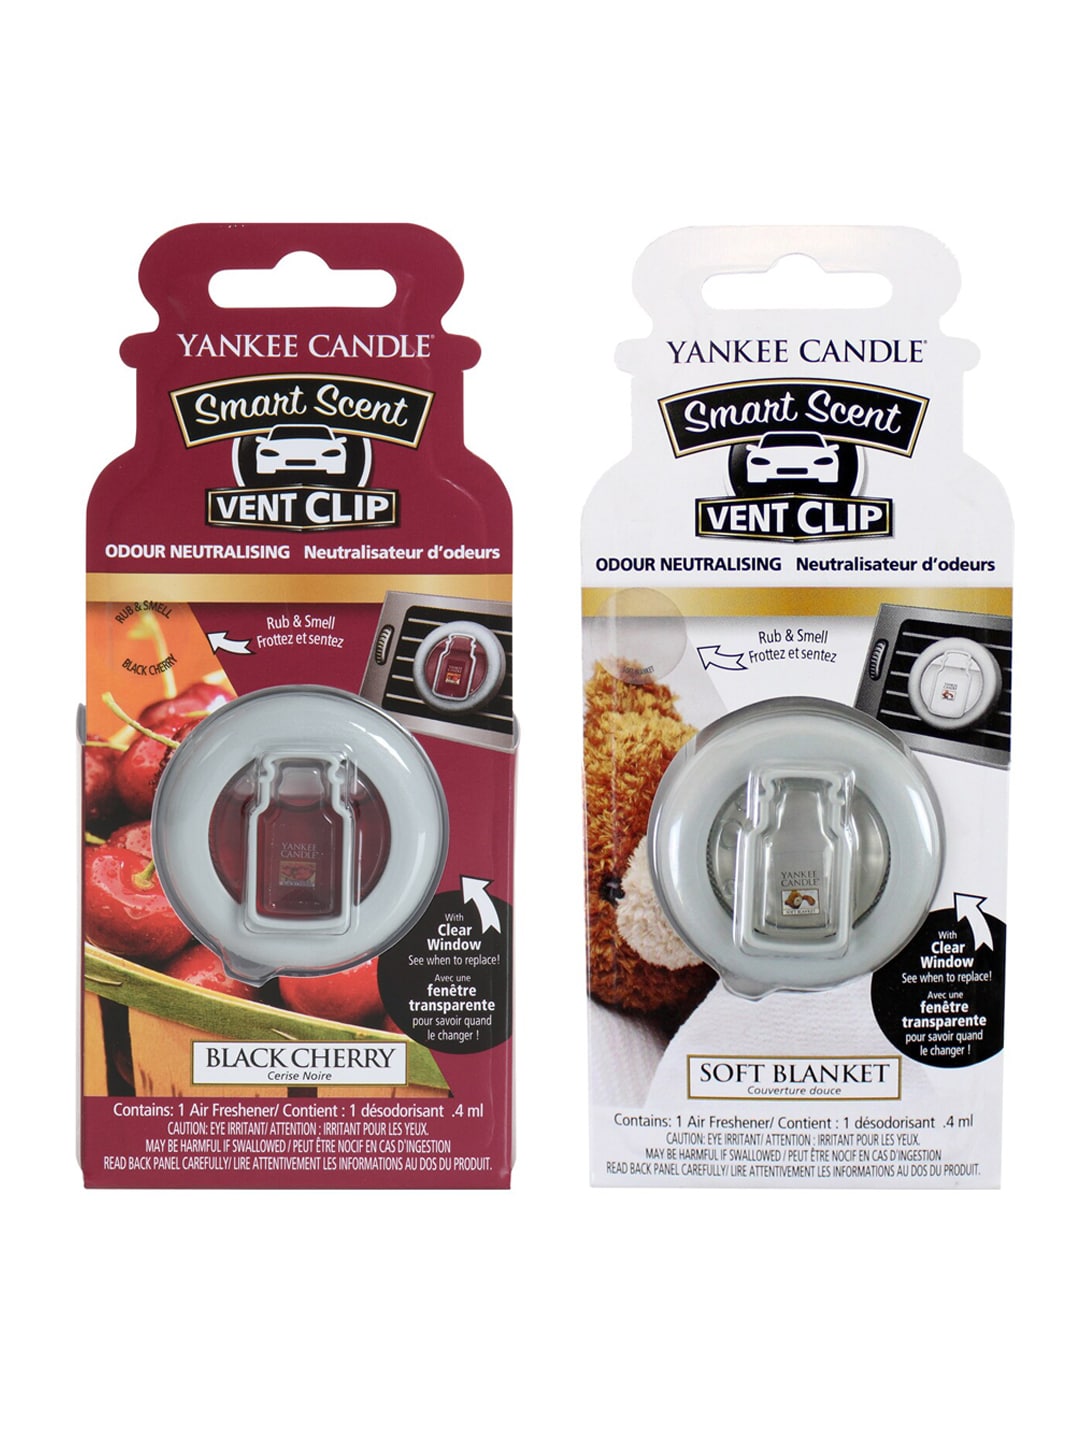 YANKEE CANDLE Set of 2 Smart Scent Vent Clip Air Freshener Price in India